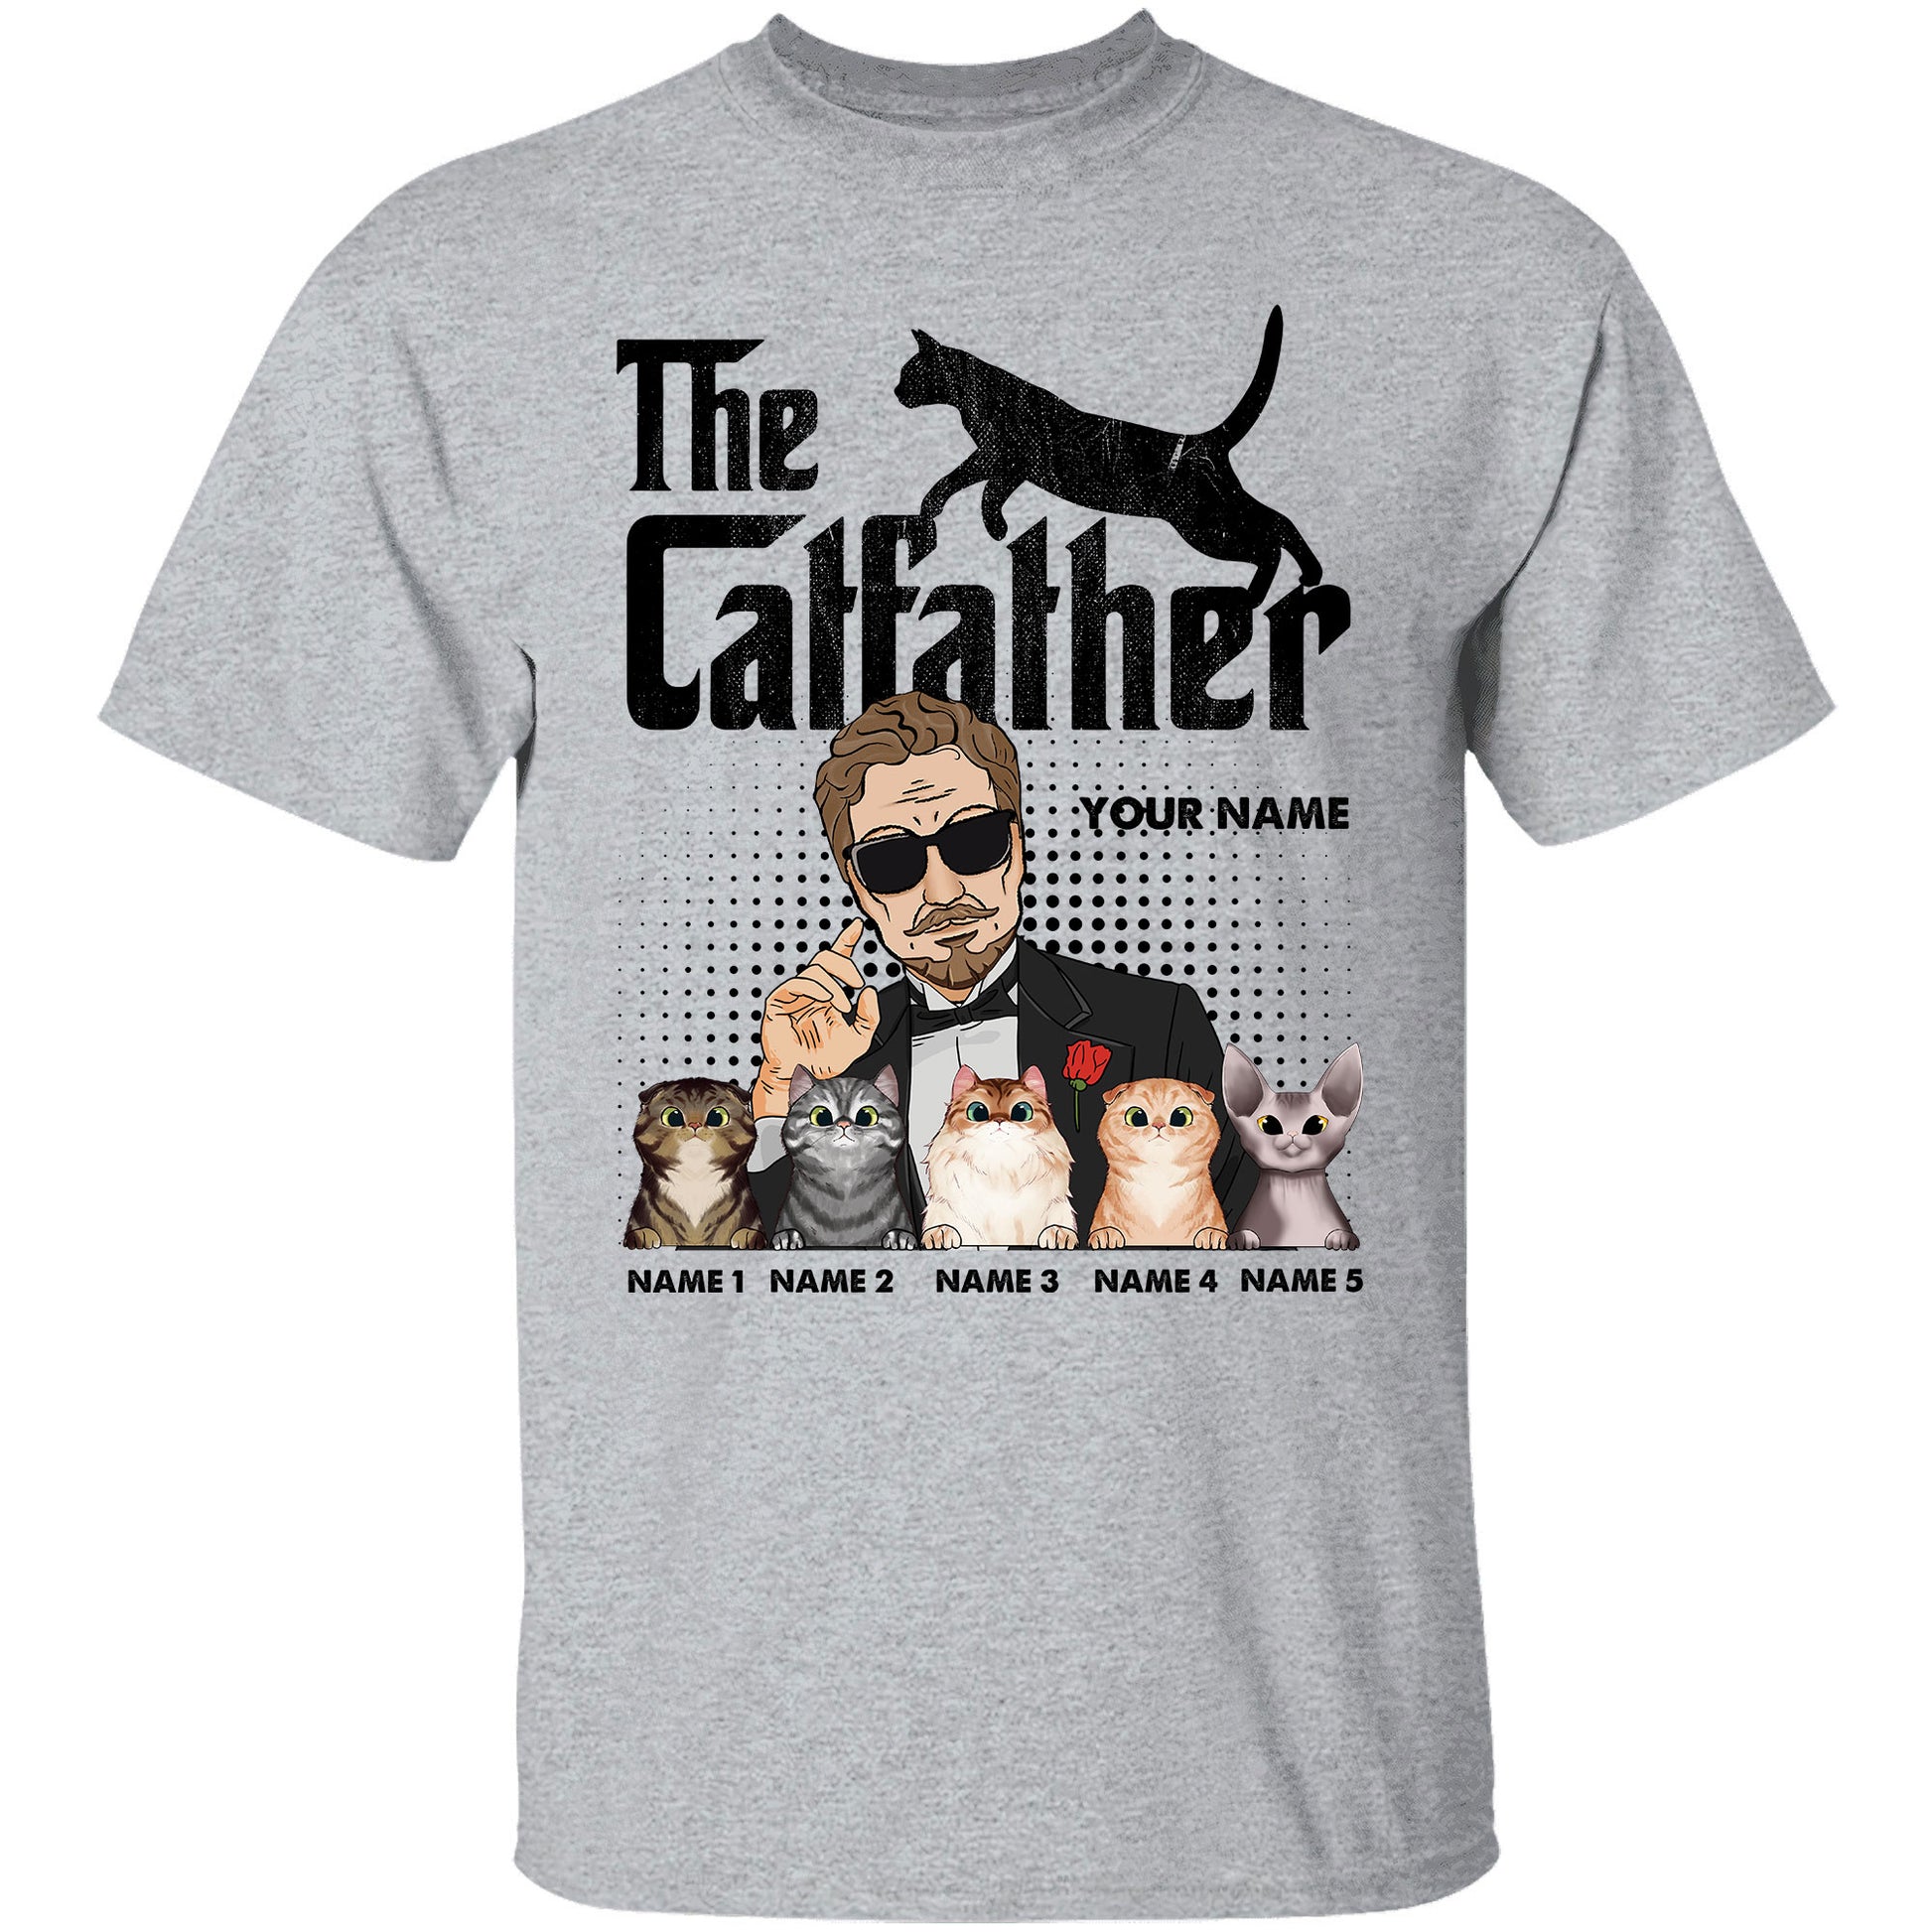 The Cat Father - Personalized Shirt - Gift For Cat Dad